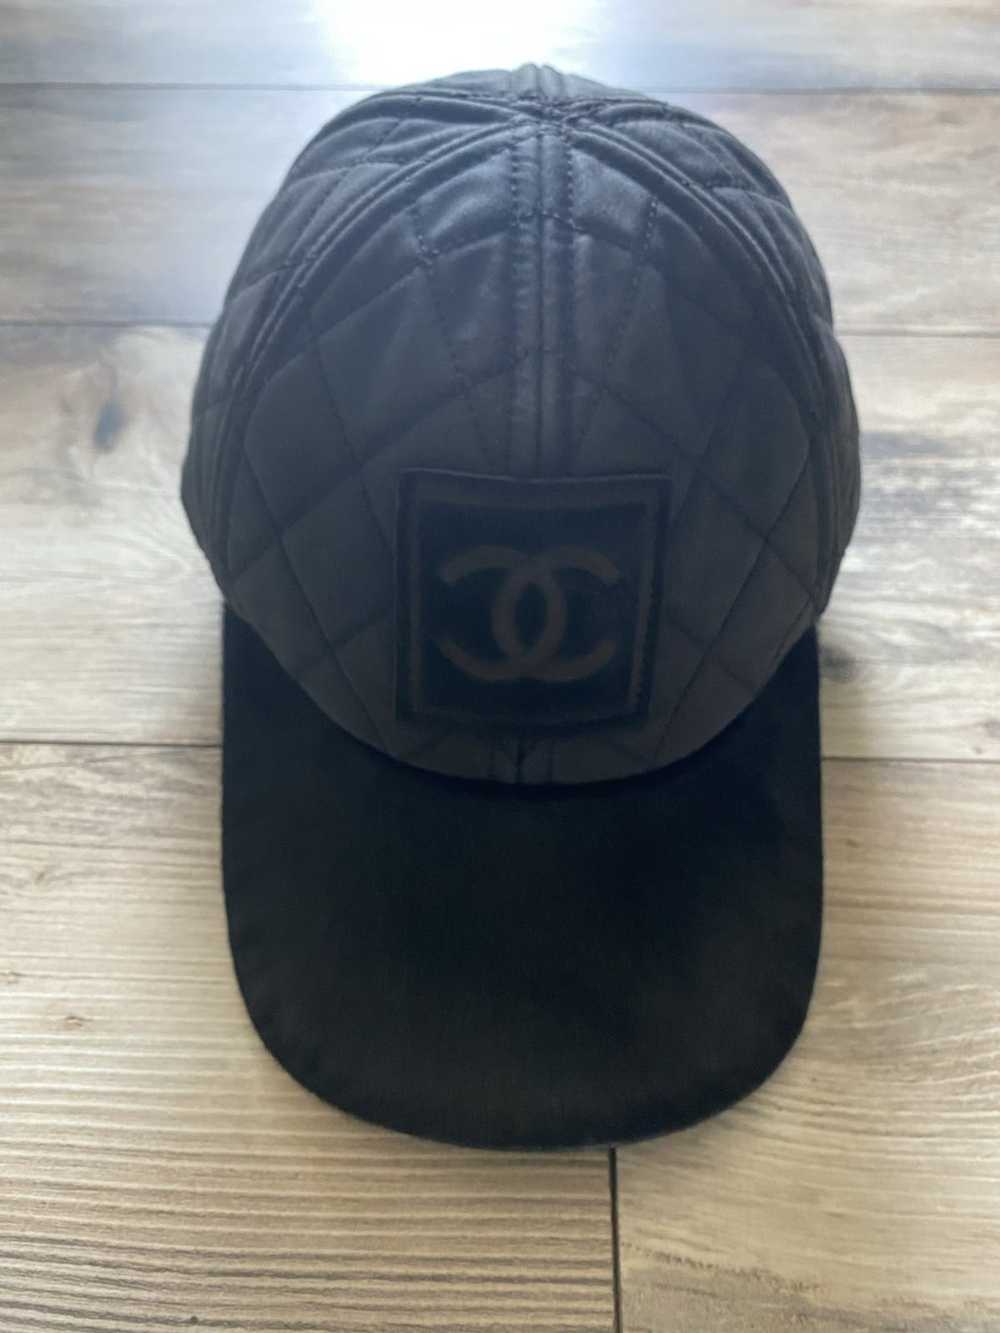 Chanel Chanel Pony Quilted Pony Hair hat - image 2